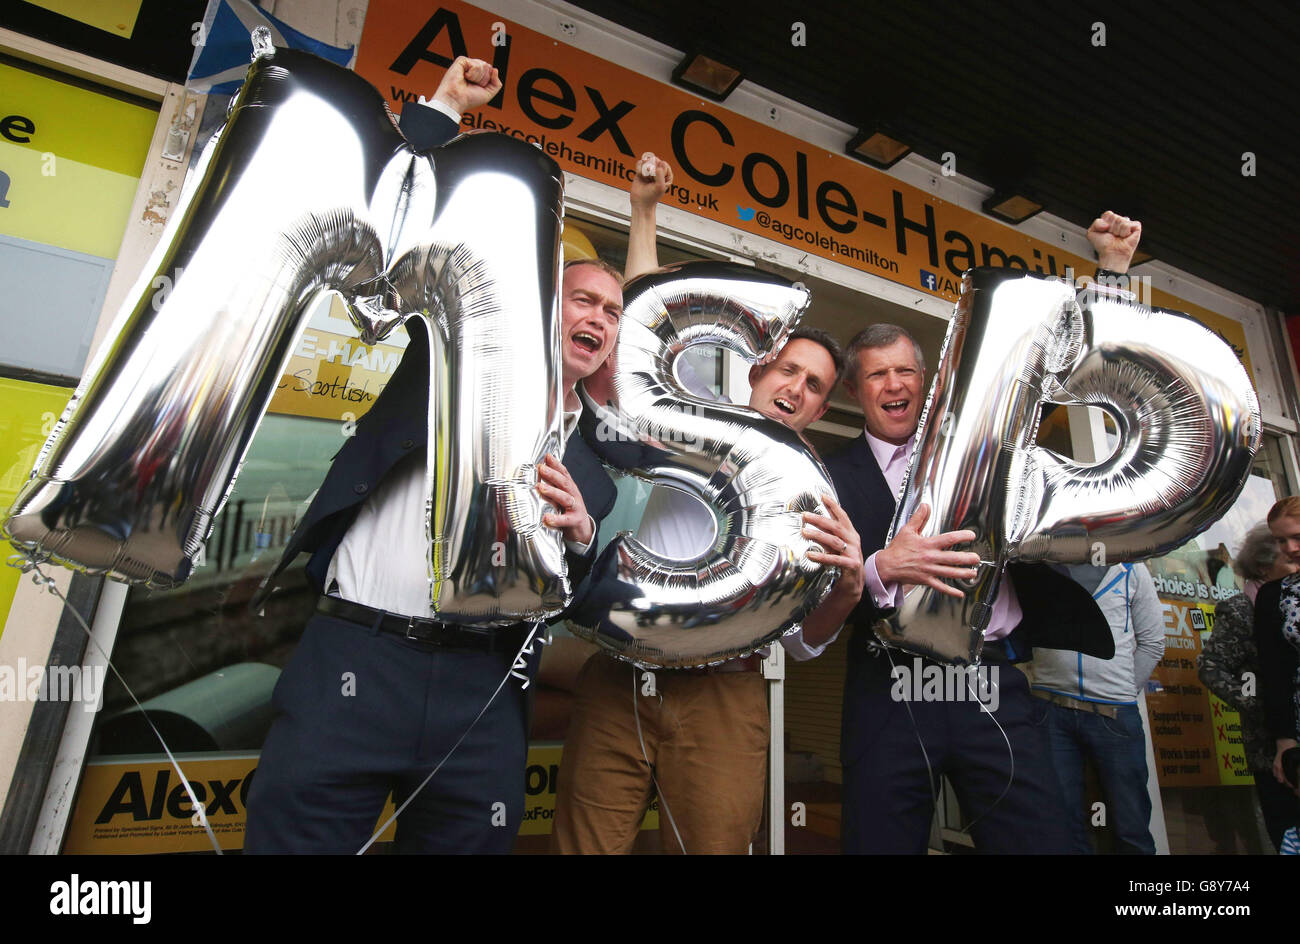 (left to right) Liberal Democrat leader Tim Farron, Lib Dem Alex Cole-Hamilton and Scottish Liberal Democrat leader Wiilie Rennie, as they celebrate in Edinburgh, after Rennie and Cole-Hamilton both won their seats in the Scottish parliamentary elections. Stock Photo